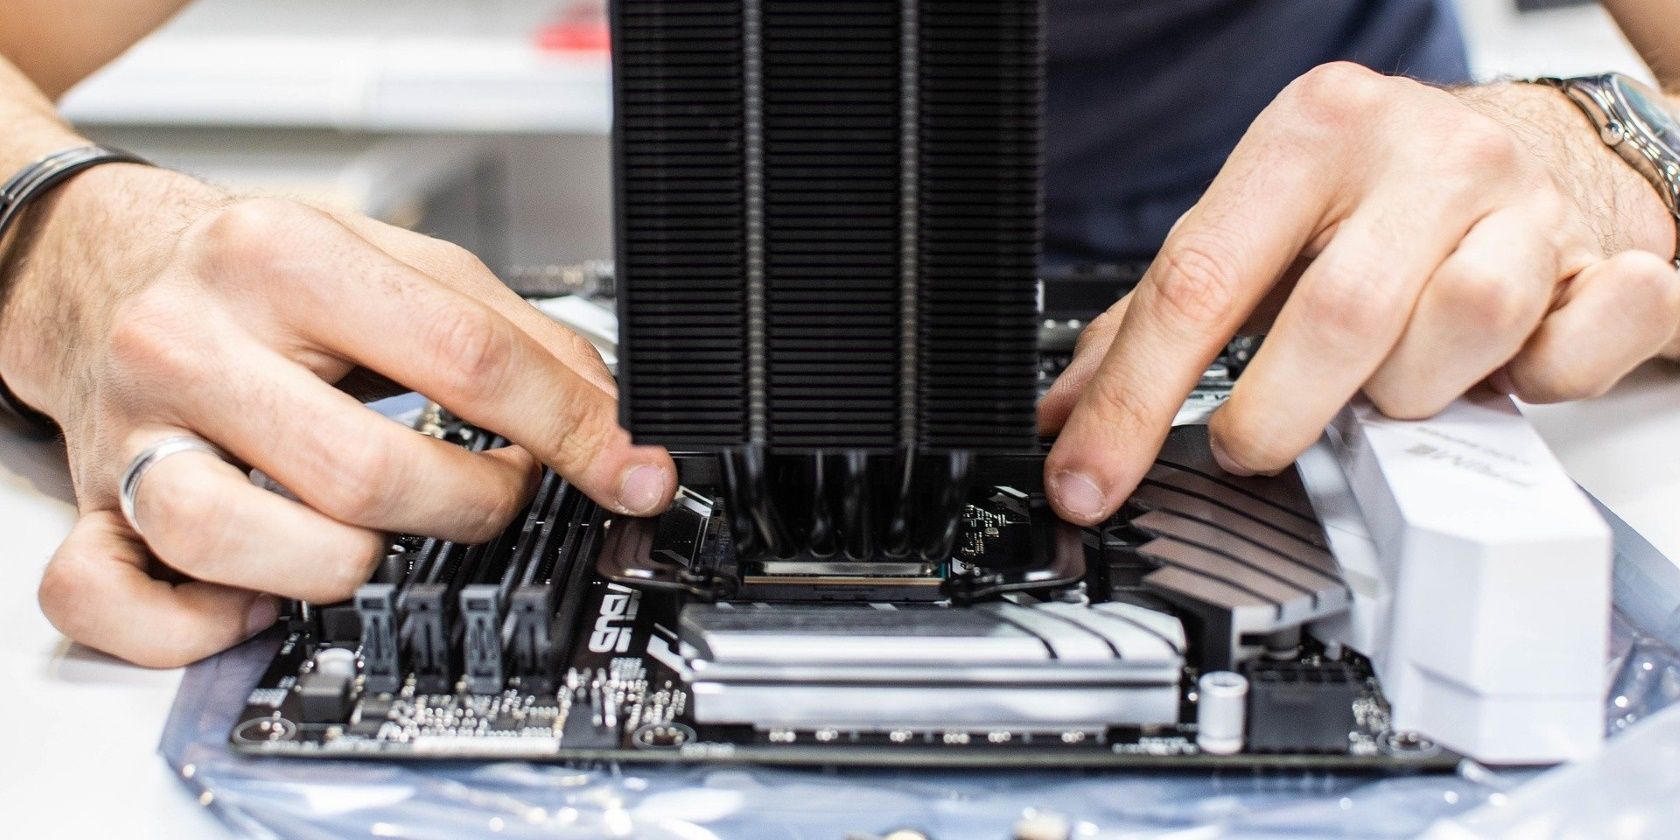 8 Common Pc Building Mistakes Beginners Makeand How To Avoid Them